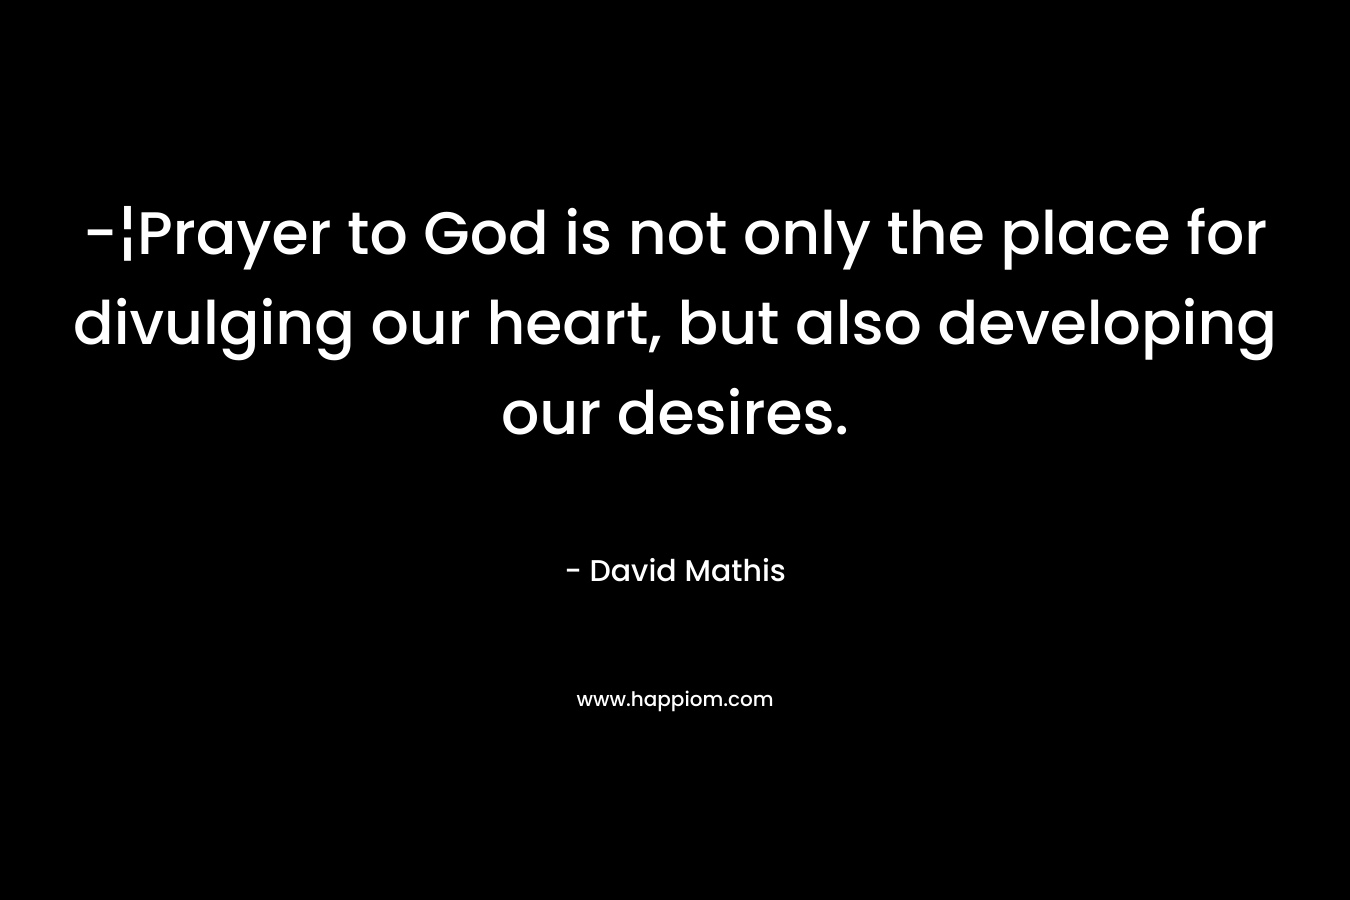 -¦Prayer to God is not only the place for divulging our heart, but also developing our desires. – David Mathis